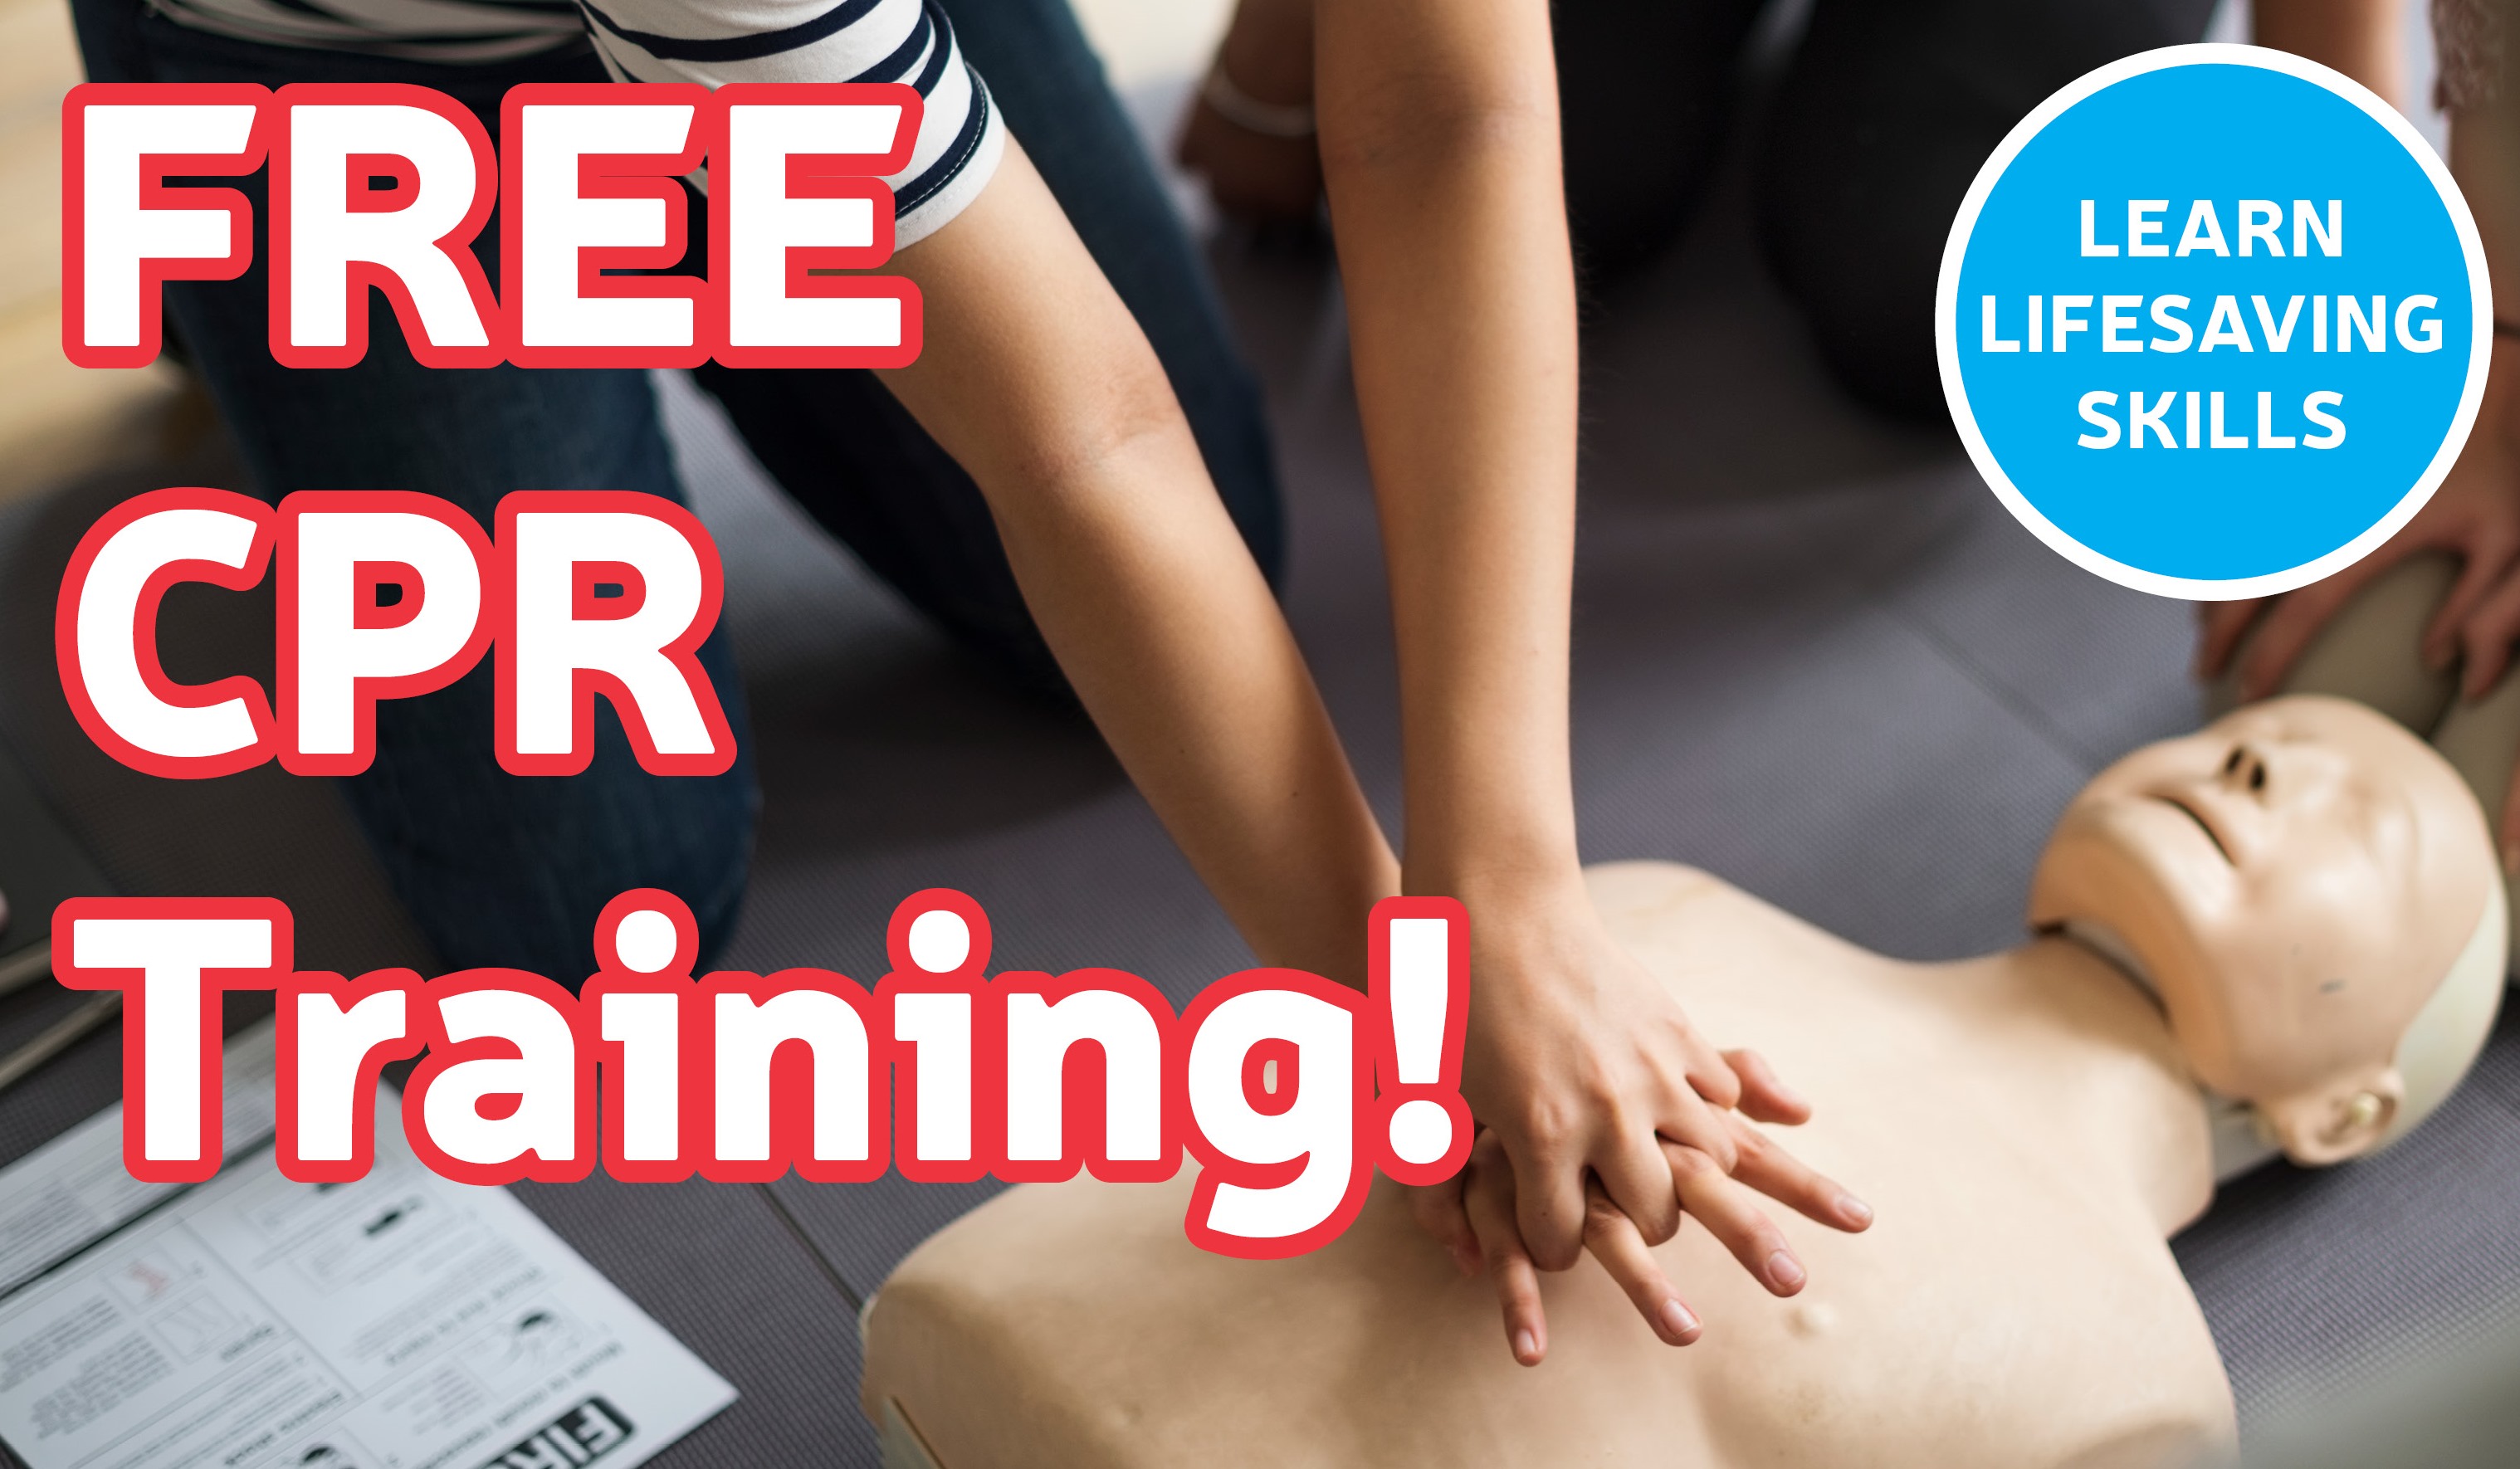 FREE CPR Training with Croí Croi Heart Stroke Charity